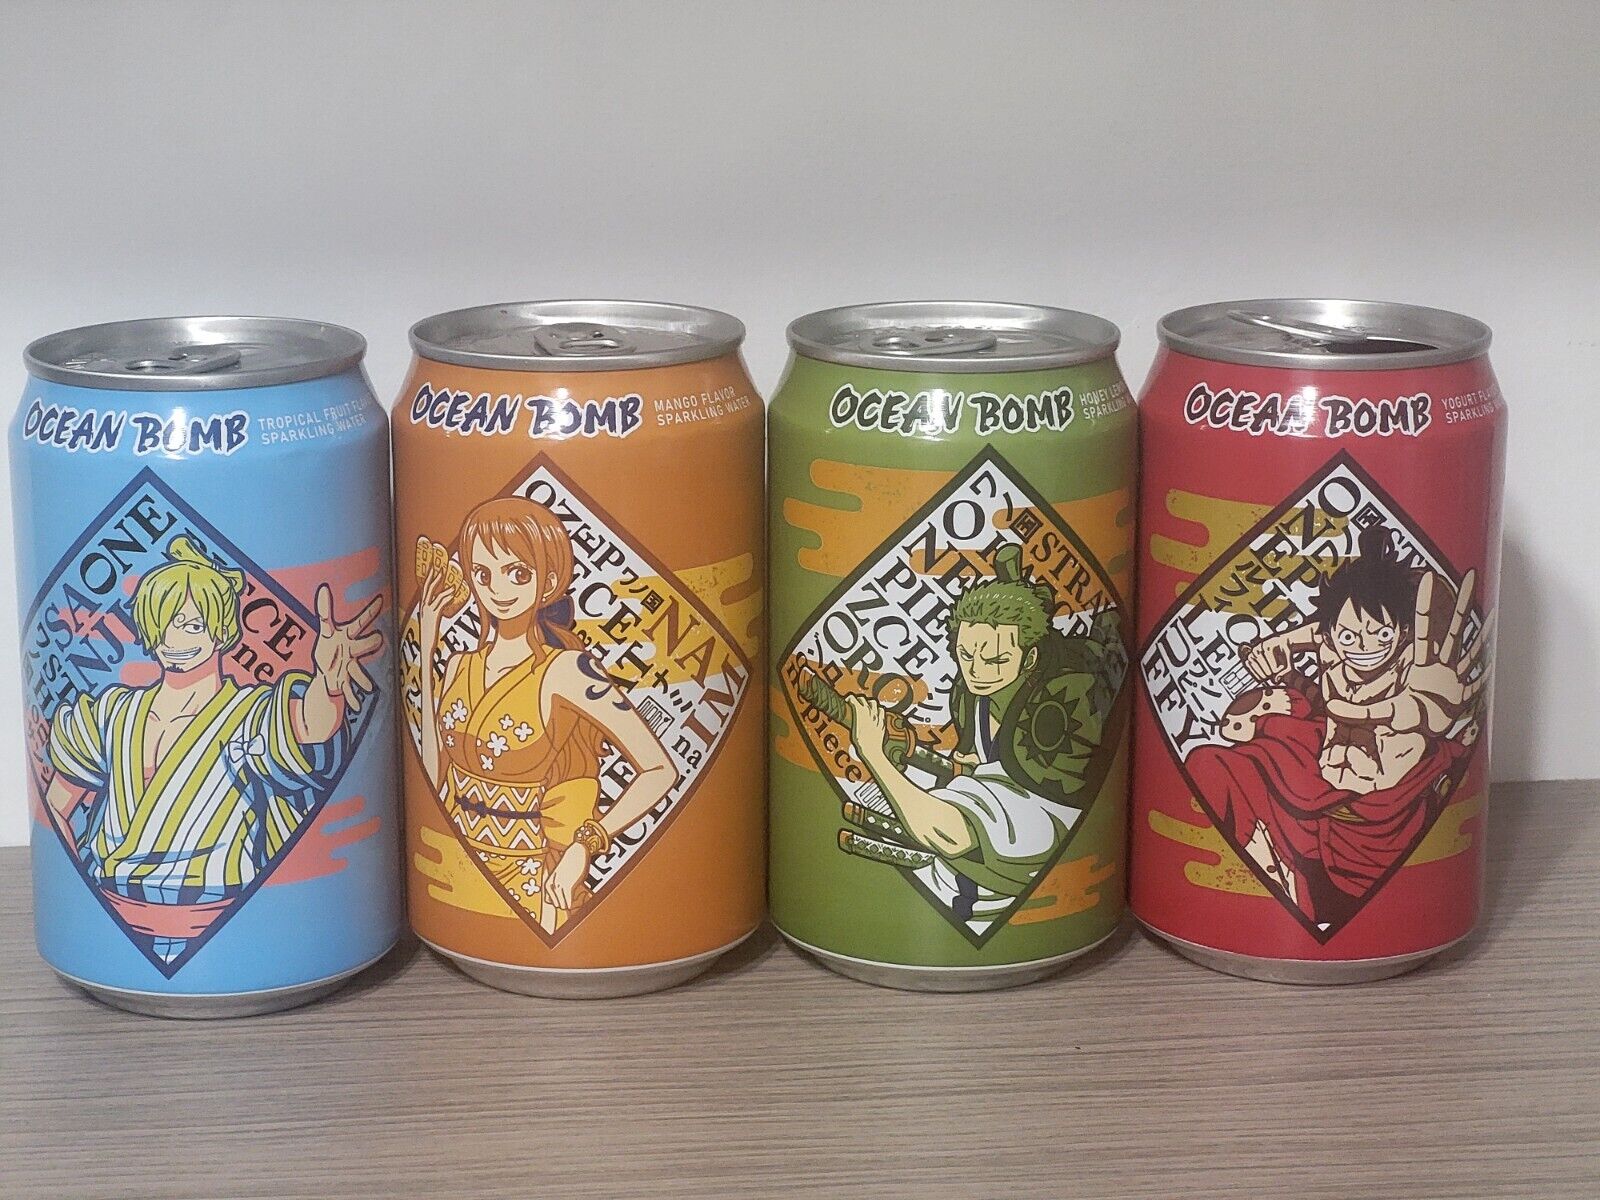 One Piece Ocean Bomb Collectible Soda Can Set of 4